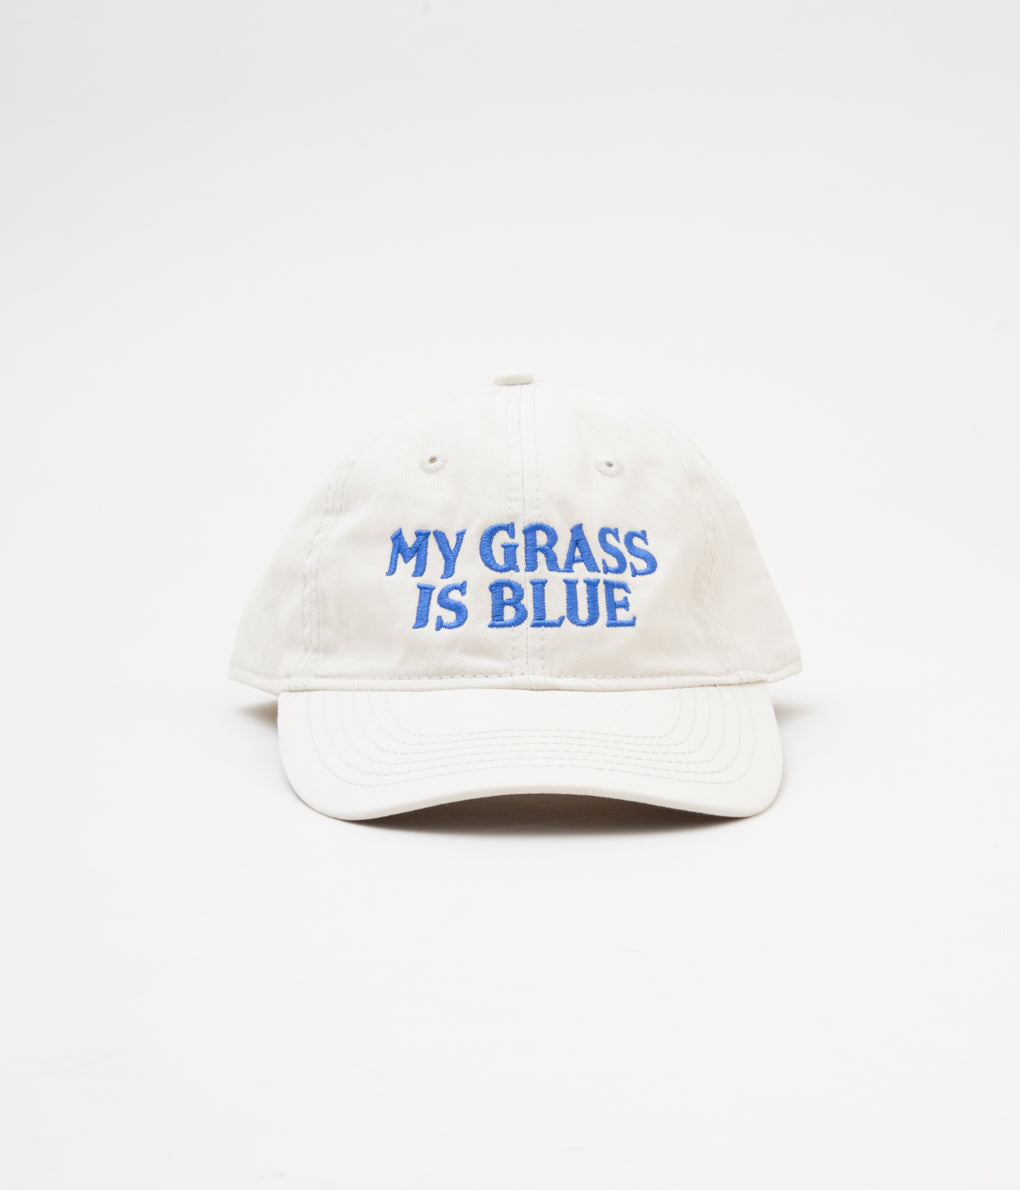 BLUESCENTRIC "MY GRASS IS BLUE HAT" (STONE WASH)